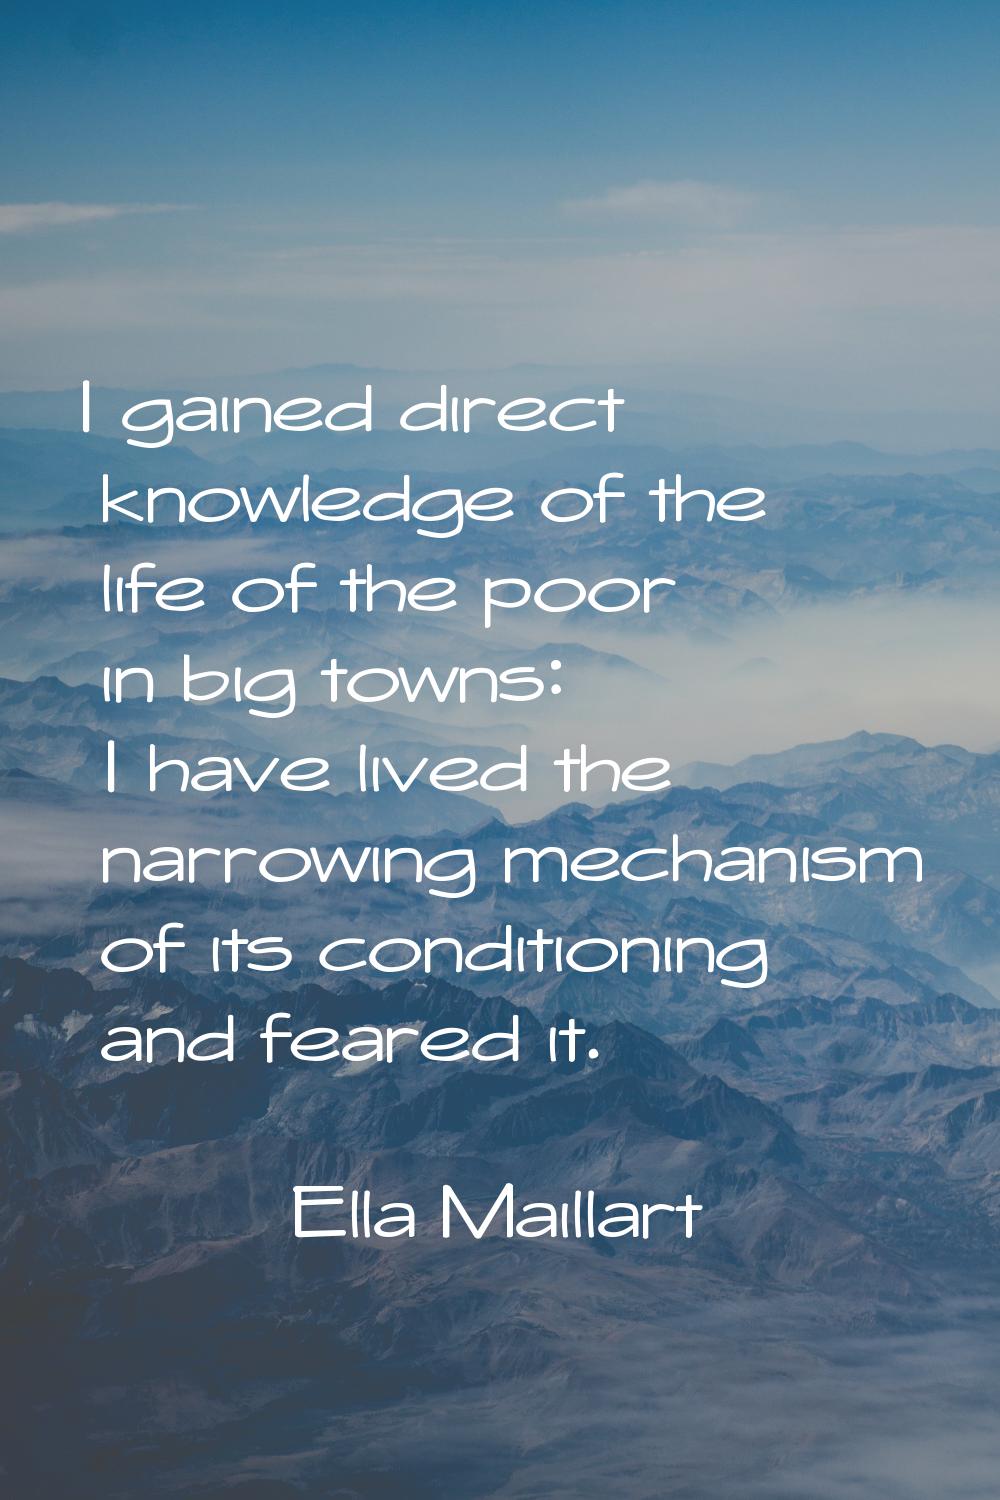 I gained direct knowledge of the life of the poor in big towns: I have lived the narrowing mechanis